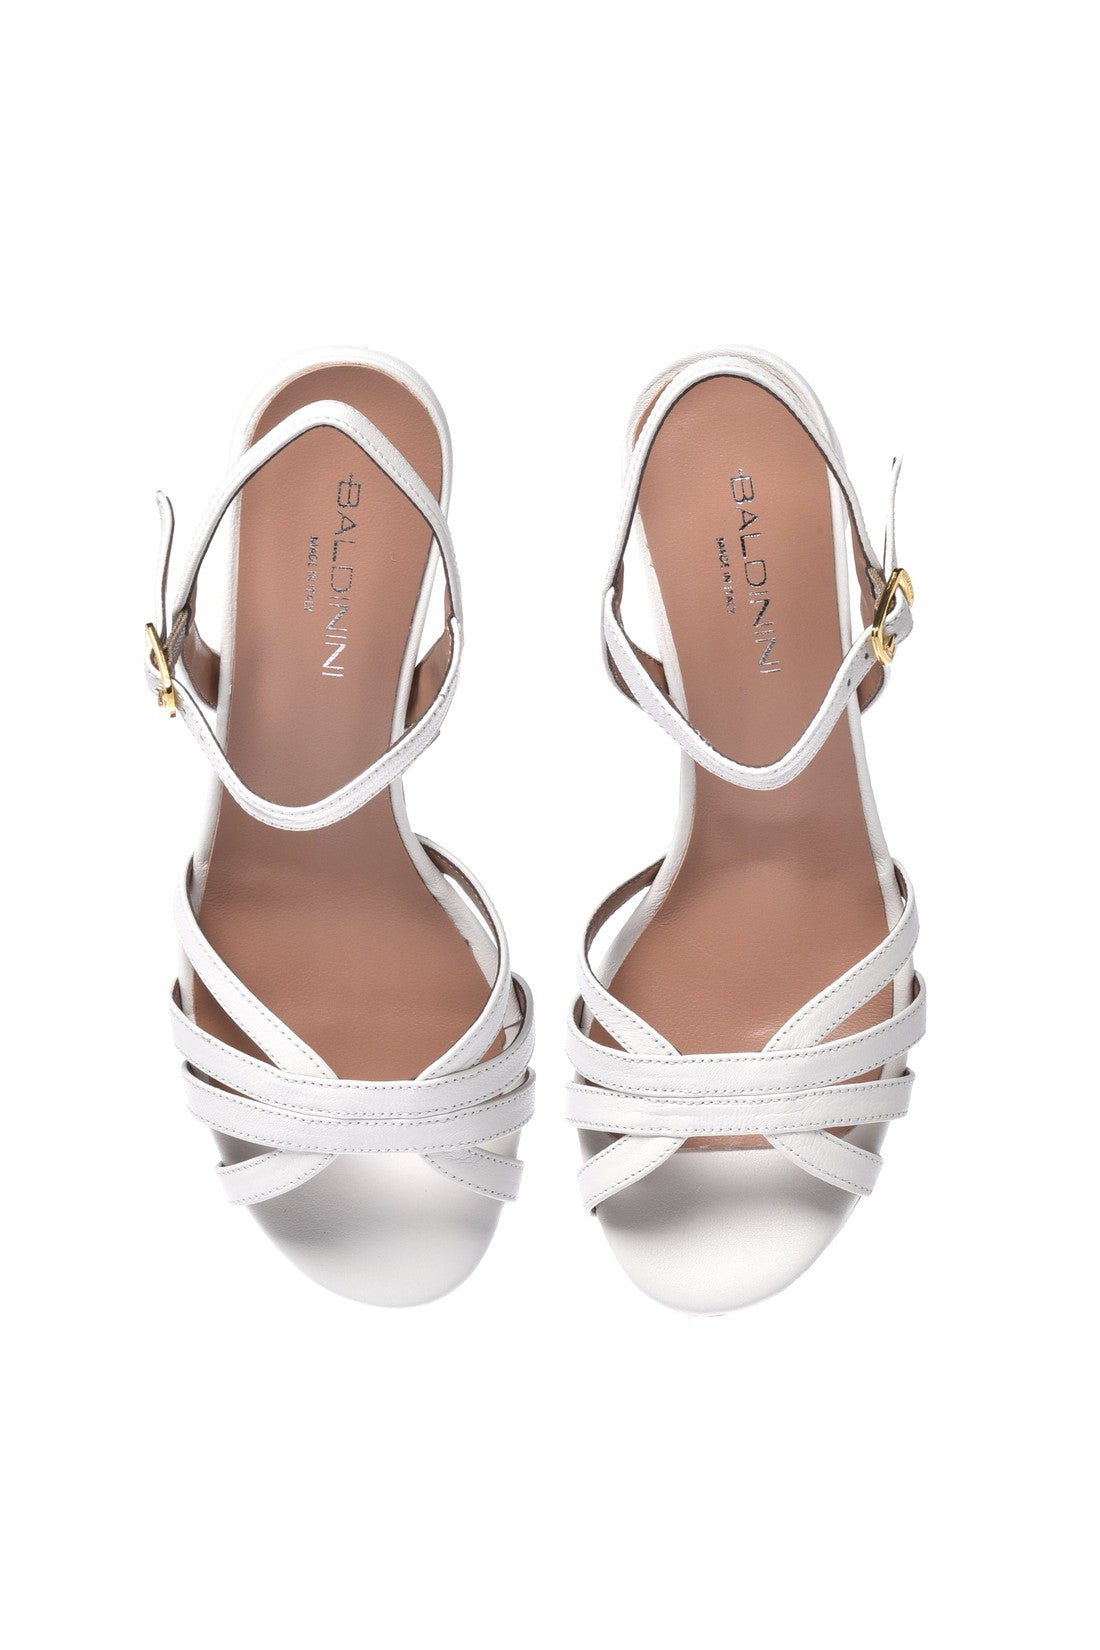 BALDININI-OUTLET-SALE-Sandal-in-cream-nappa-leather-Sandalen-ARCHIVE-COLLECTION-2.jpg